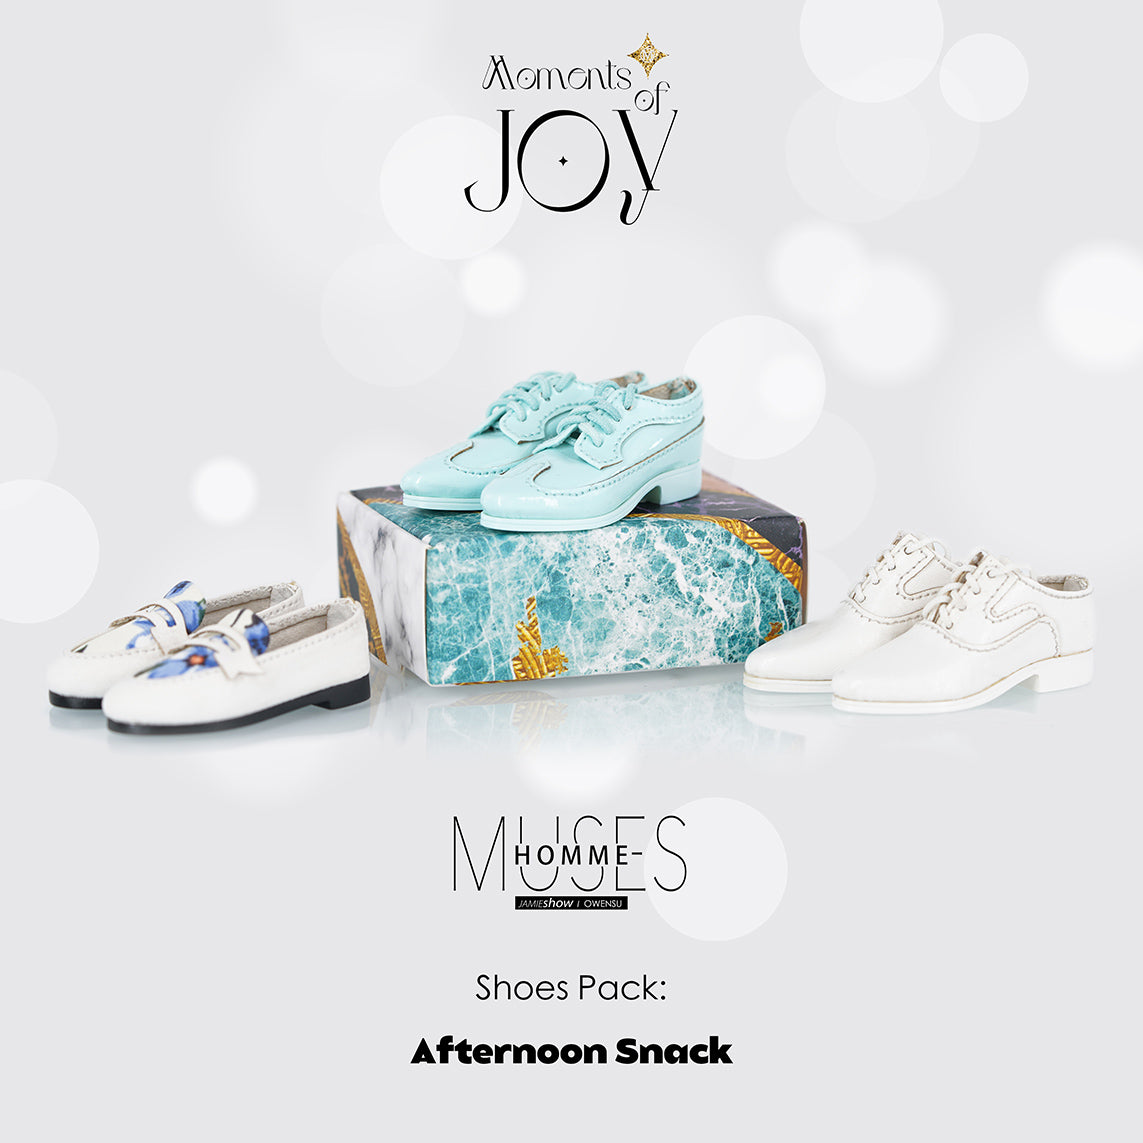 Muses Moments of Joy Men's Shoe Pack AFTERNOON SNACK